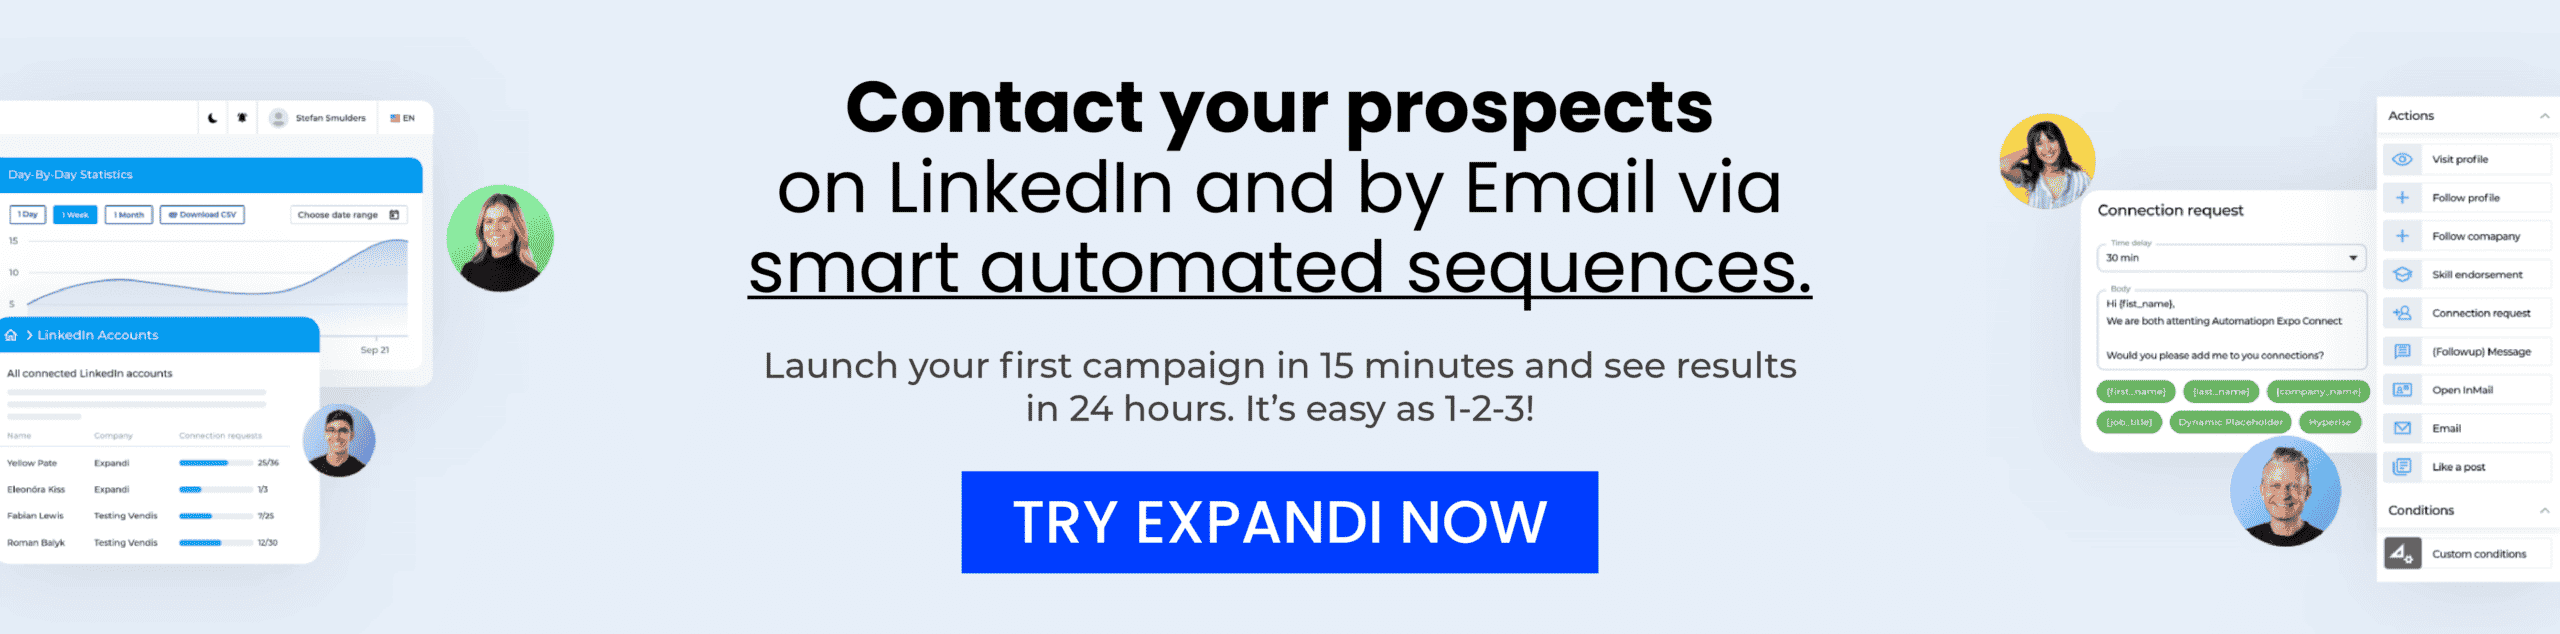 contact-your-prospects